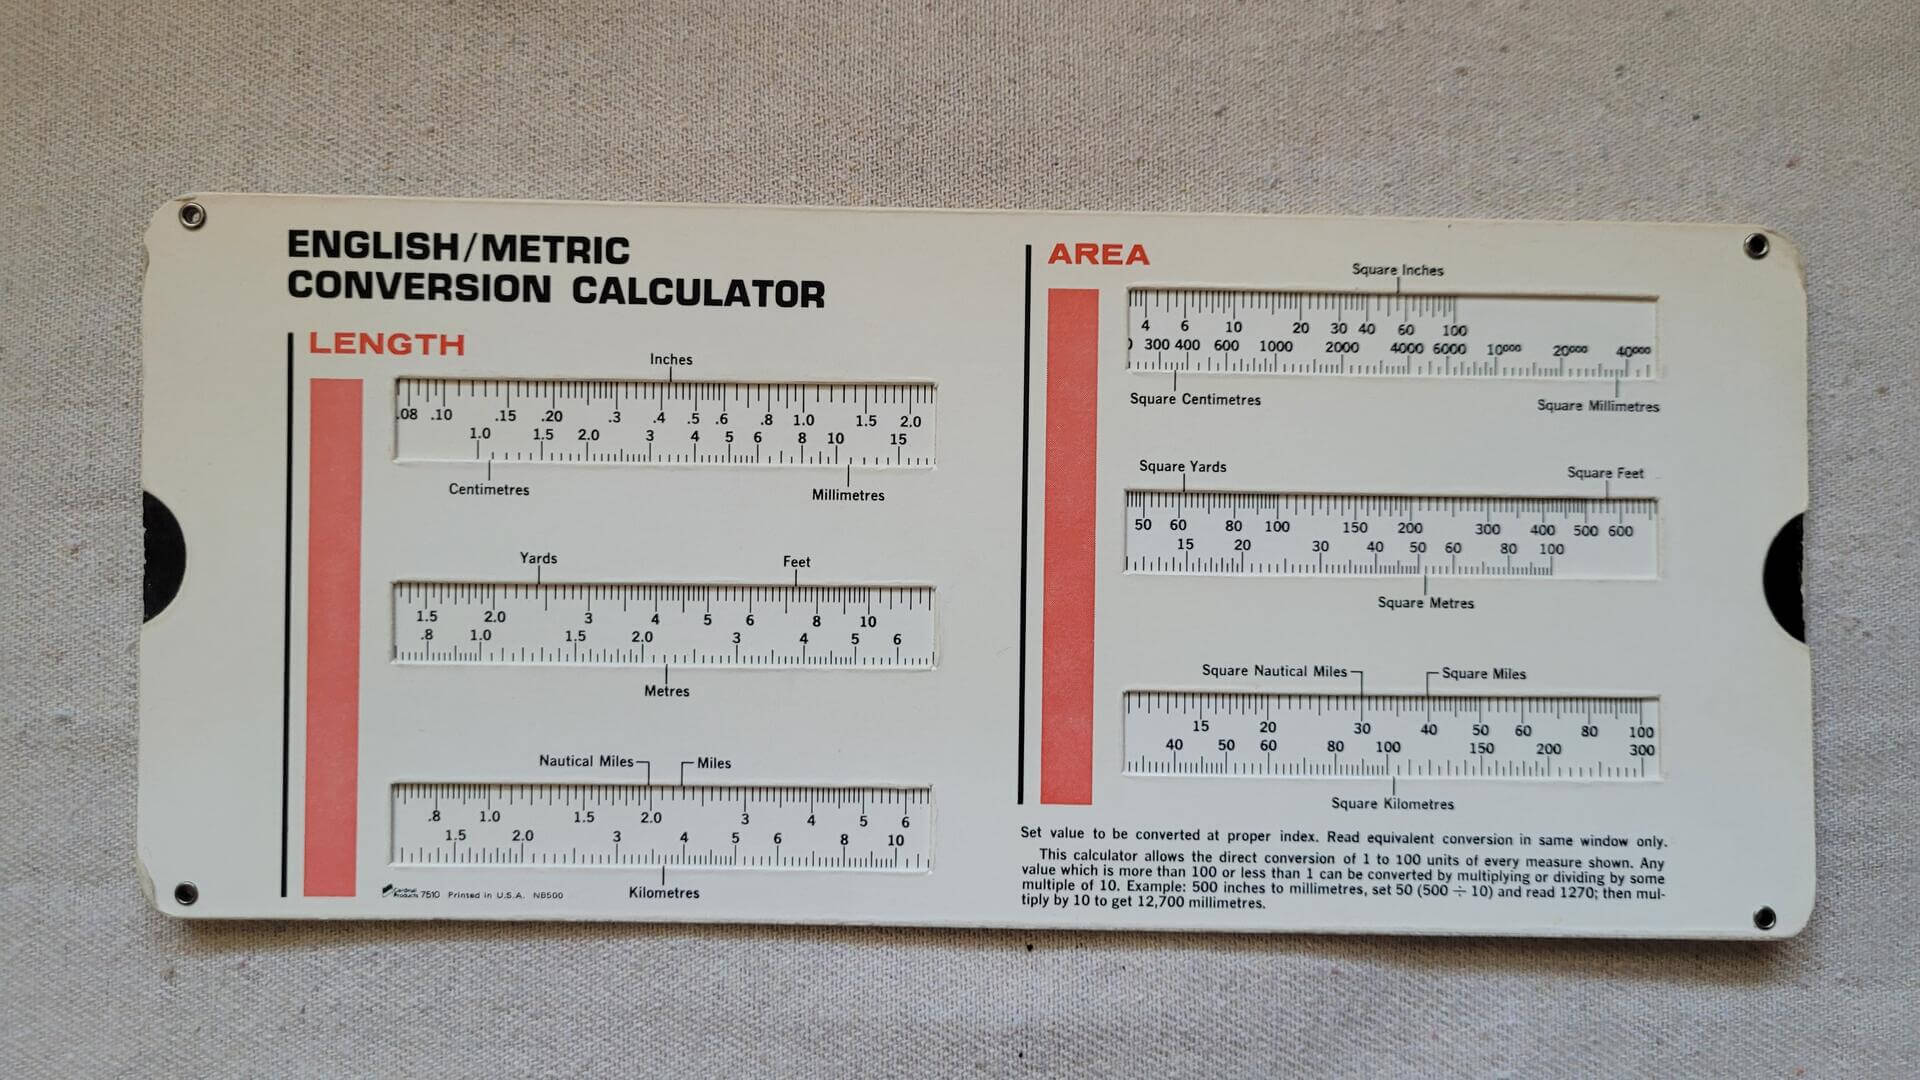 english-metric-conversion-calculator-cardboard-sliding-ruler-1970s-made-in-usa-collectible-office-and-school-tools-supplies-front